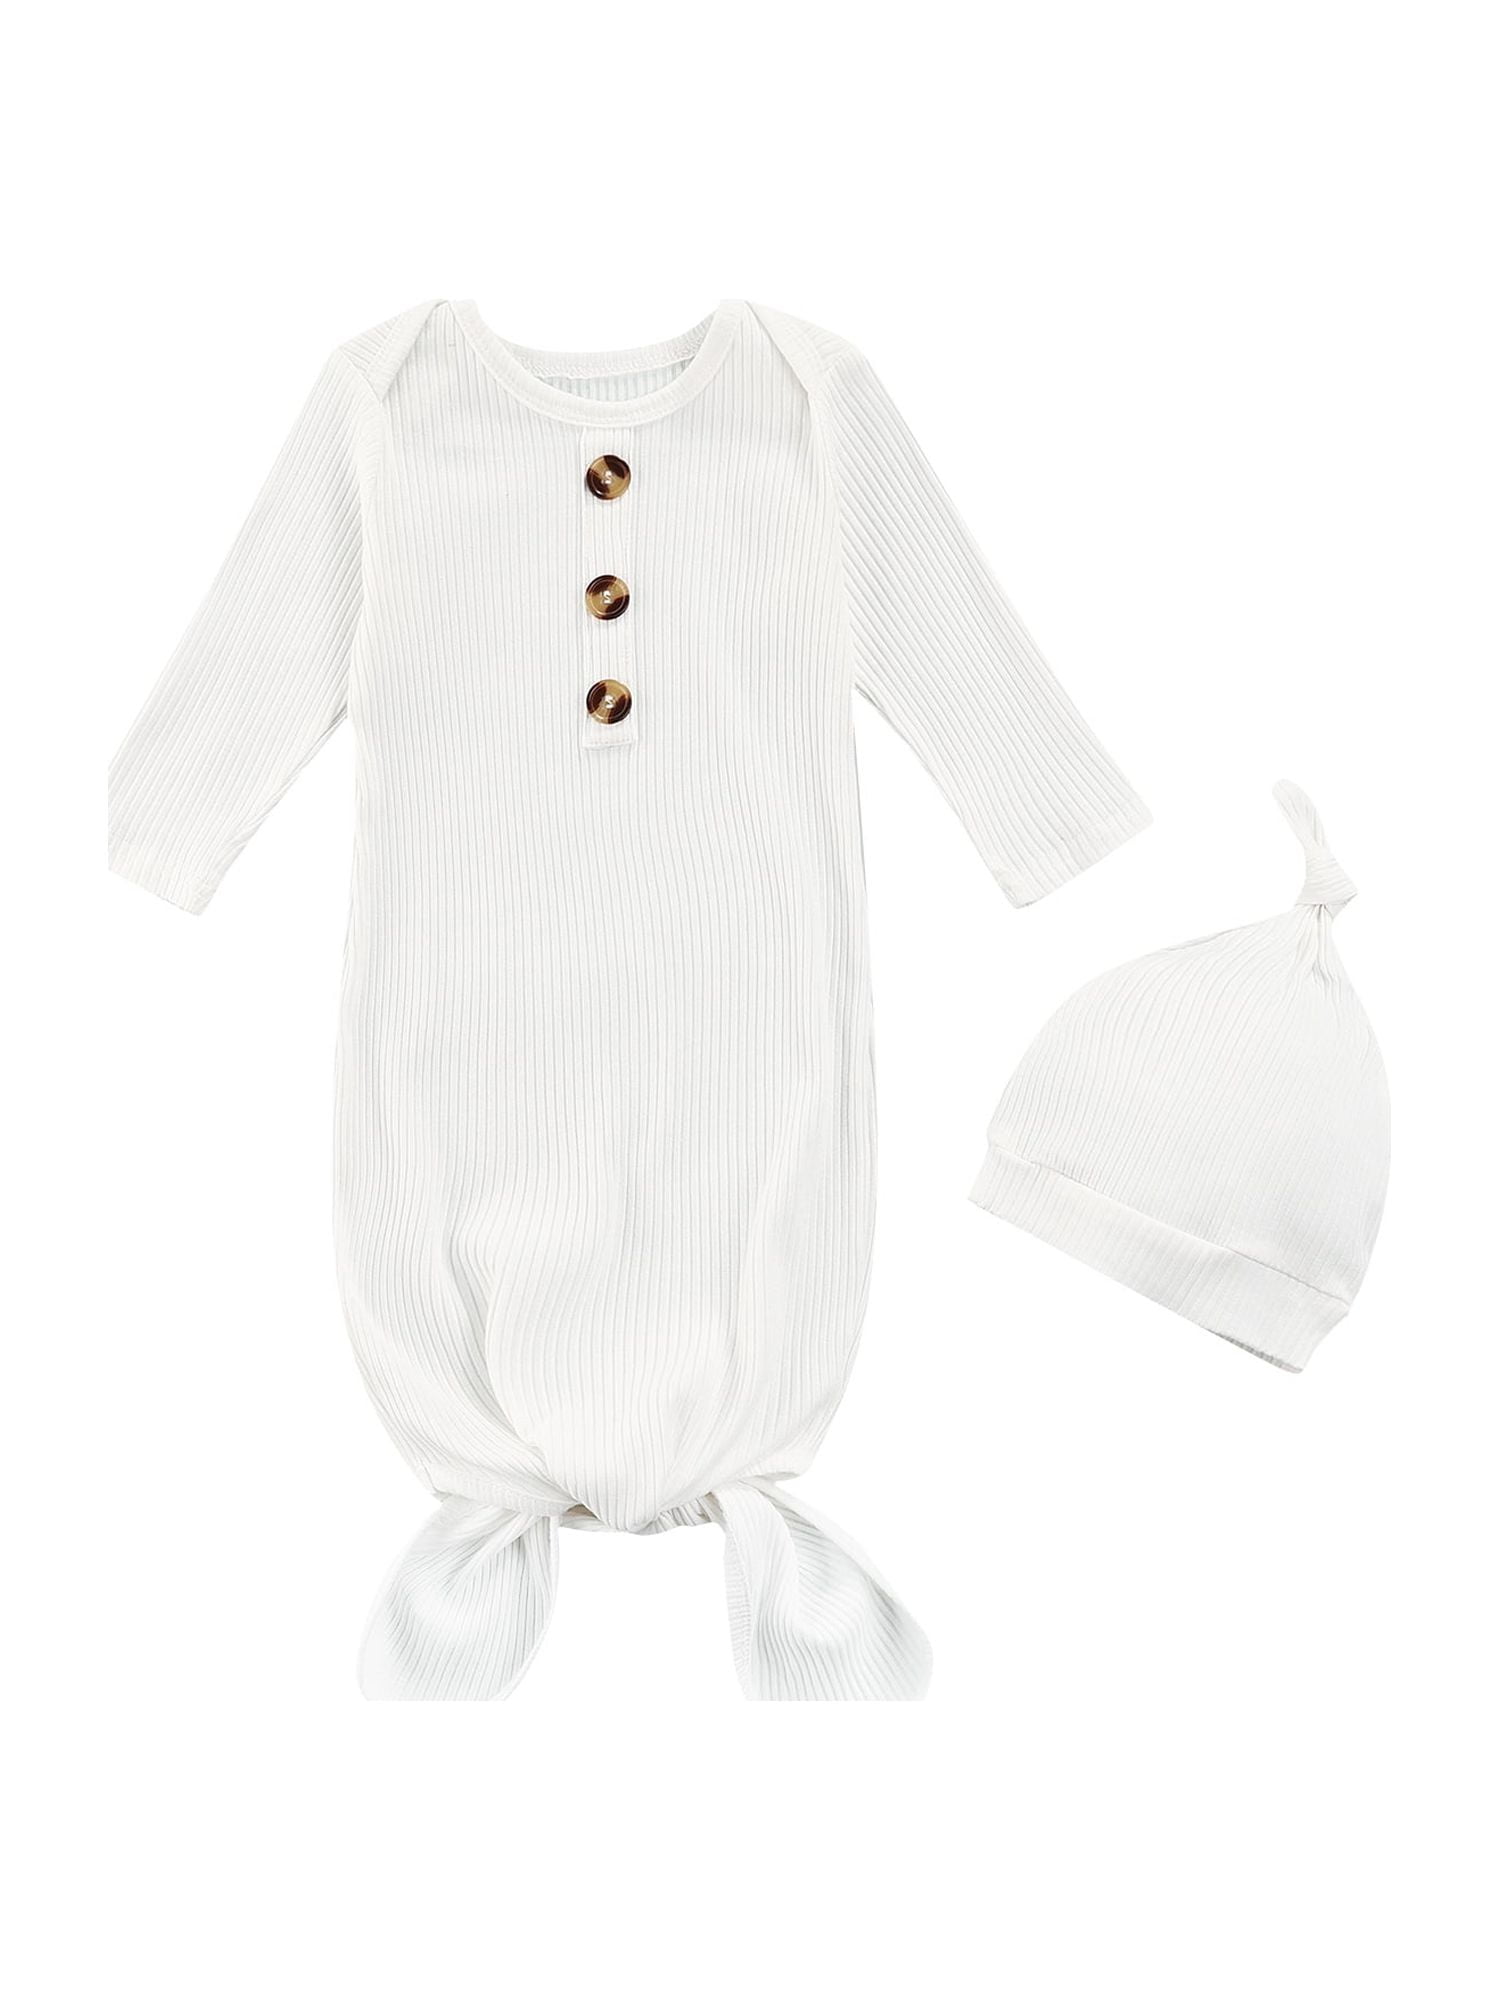 Girls Clothing | Princess White baby gown✓ | Freeup